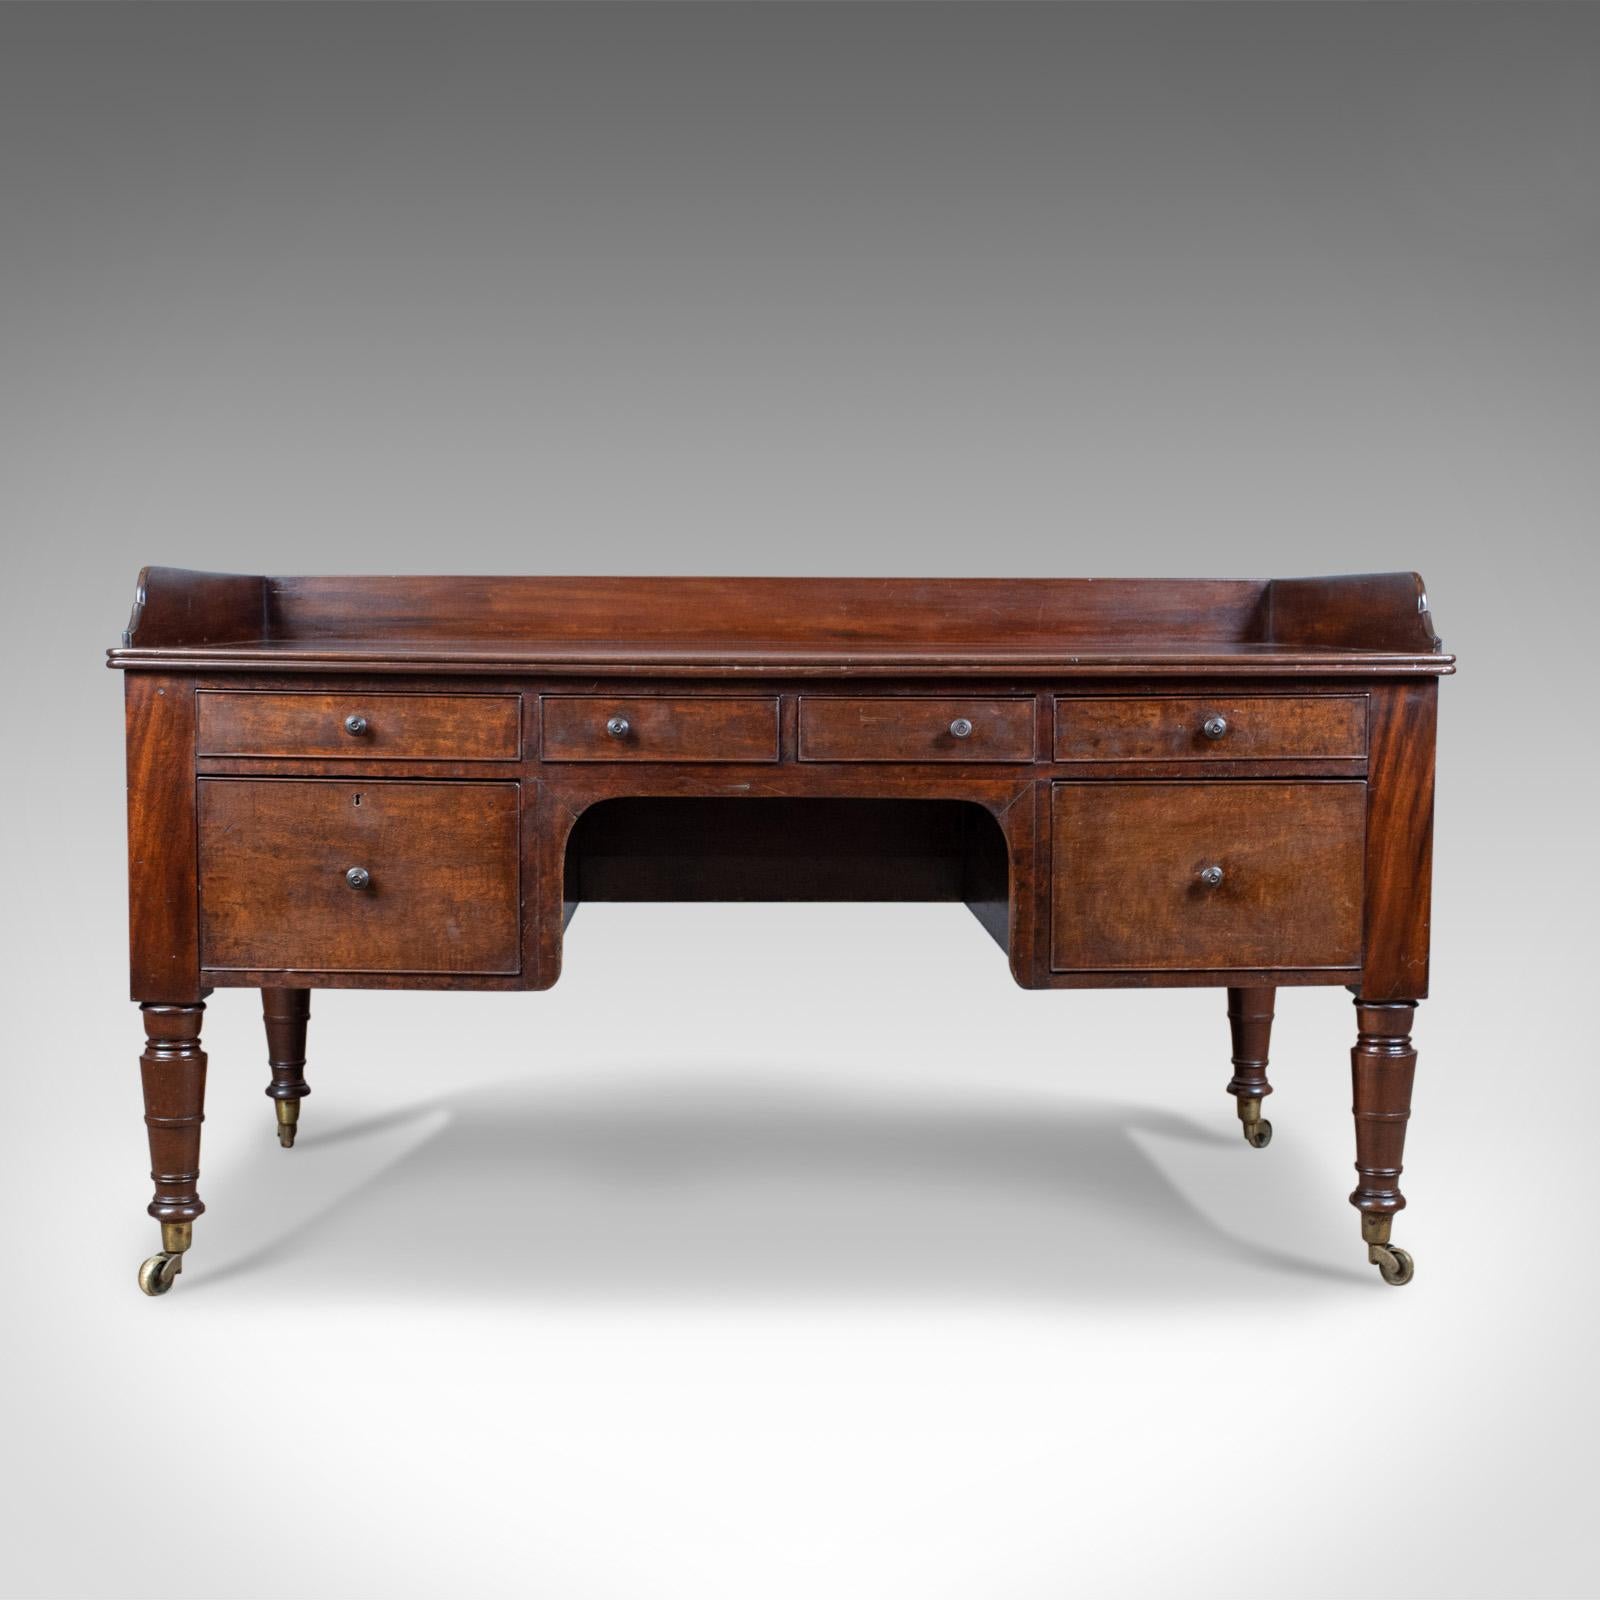 This is an antique desk, a large, English, William IV mahogany kneehole desk dating to the early 19th century, circa 1835.

Of generous proportions offering a large work surface
Shaped, three-quarter up-stand 
Rear overhang for close wall